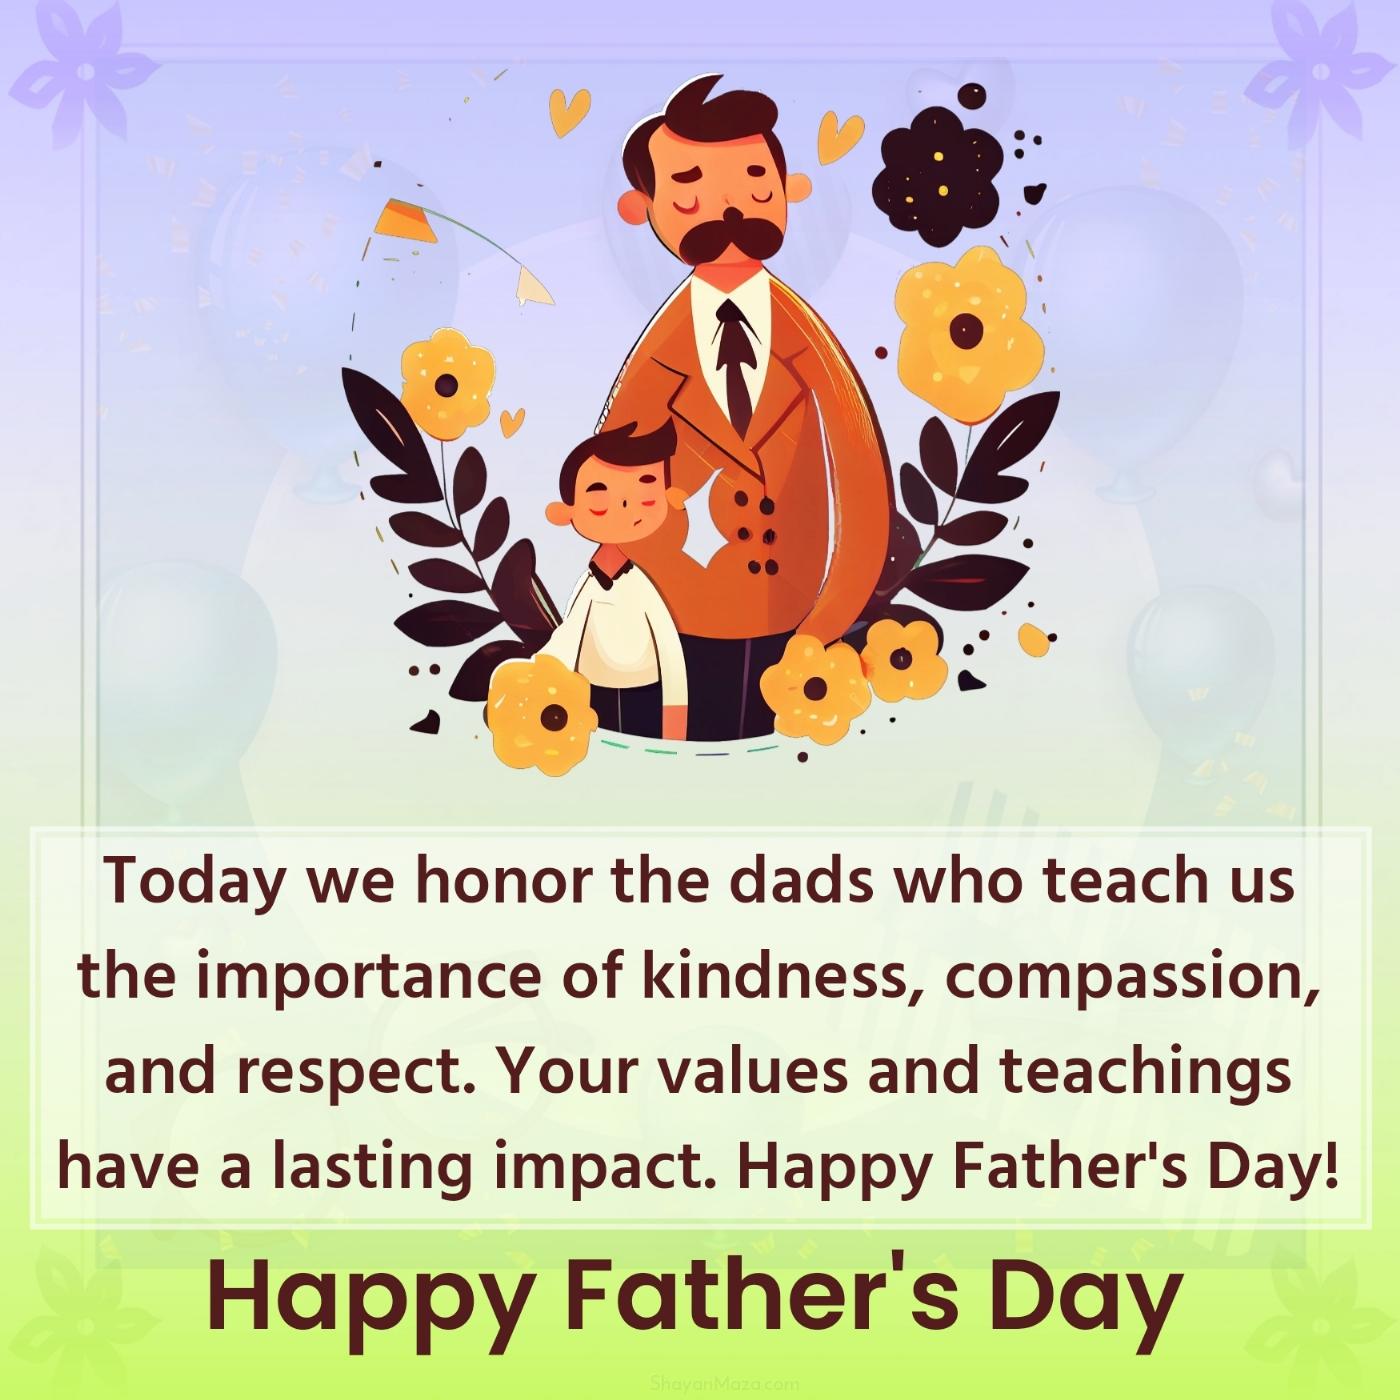 Today we honor the dads who teach us the importance of kindness